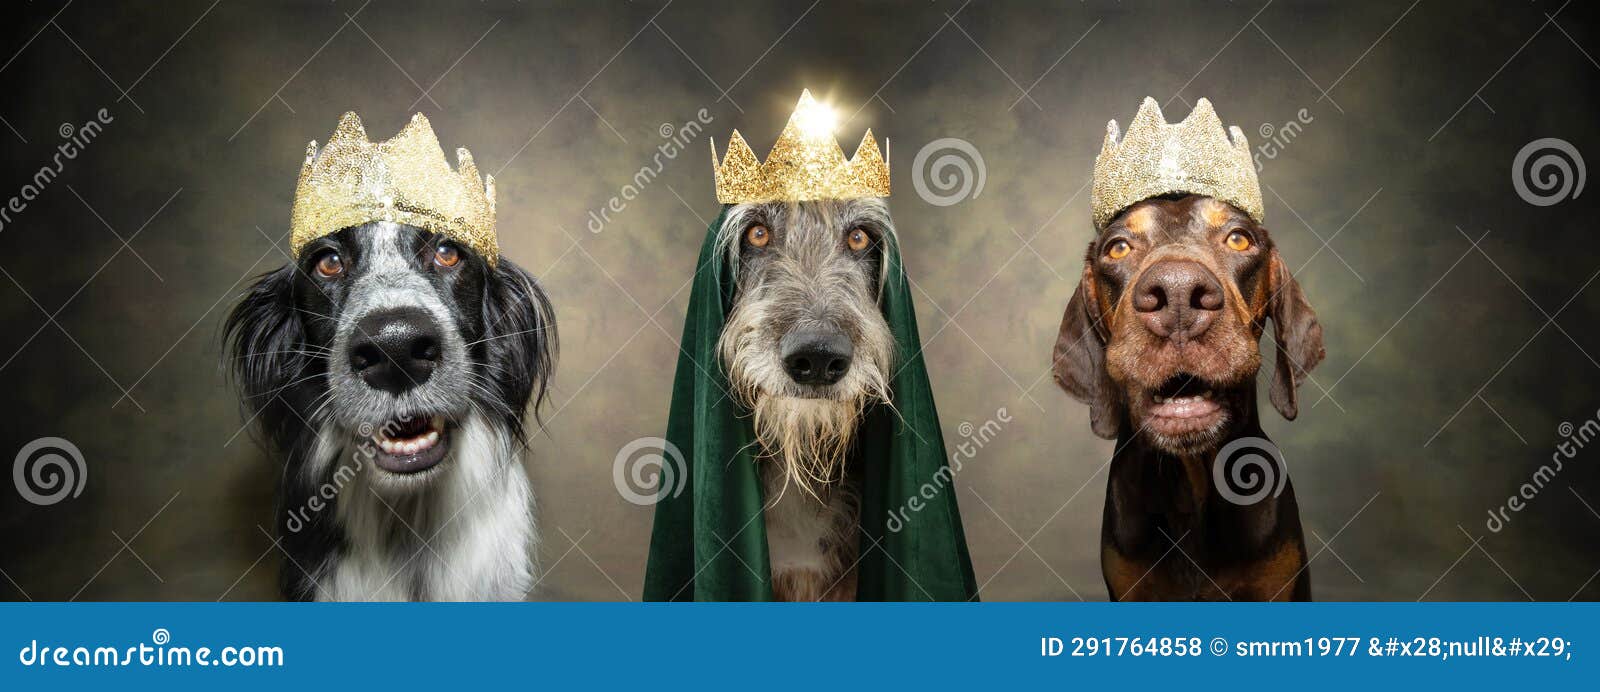 pet crown. three dogs celebrating the three wise men from the birth of christ.  on plain background